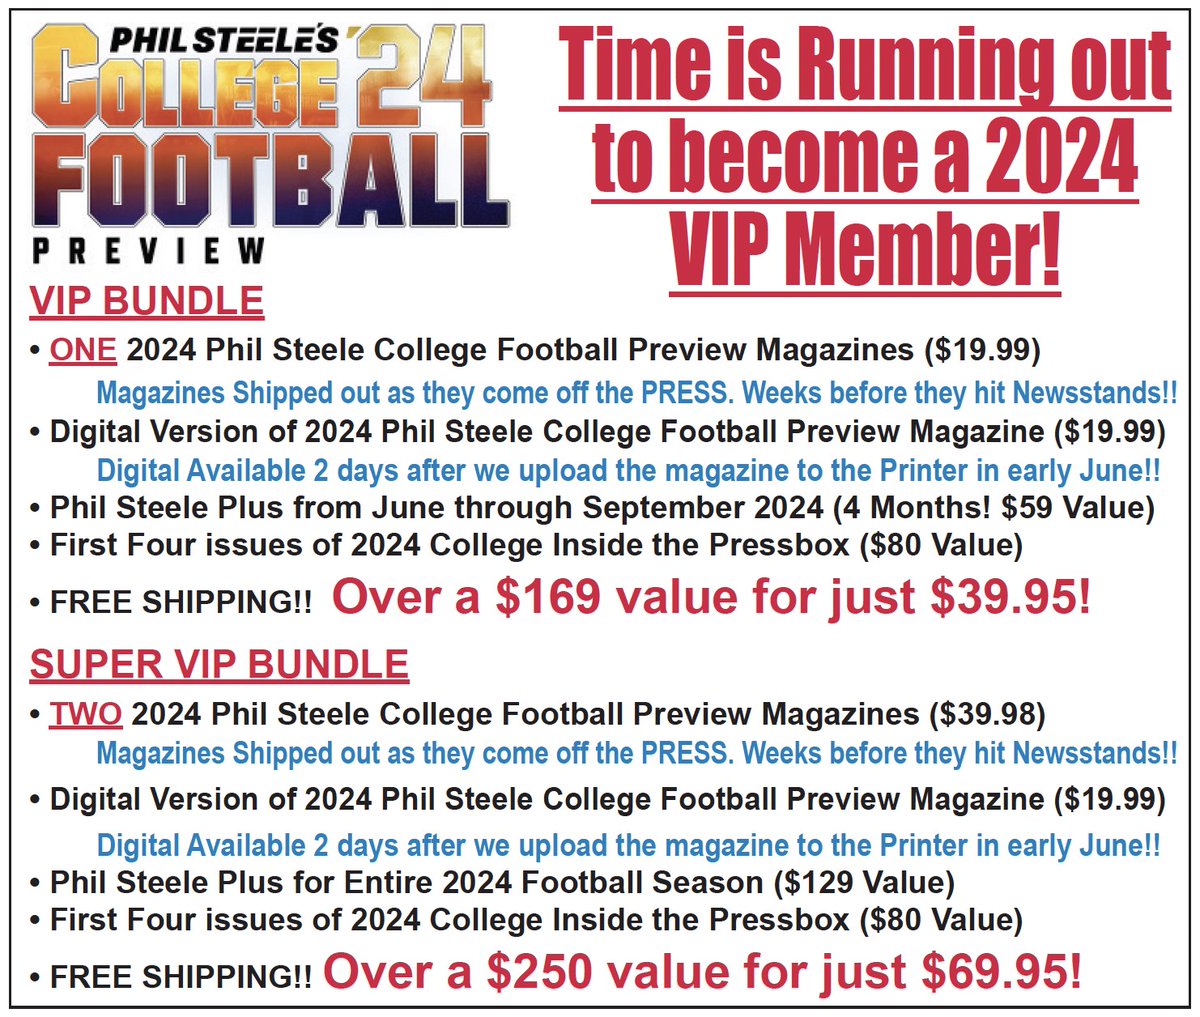 Time is running out to become a VIP member! Here is a link to sign up philsteele.com/vip/